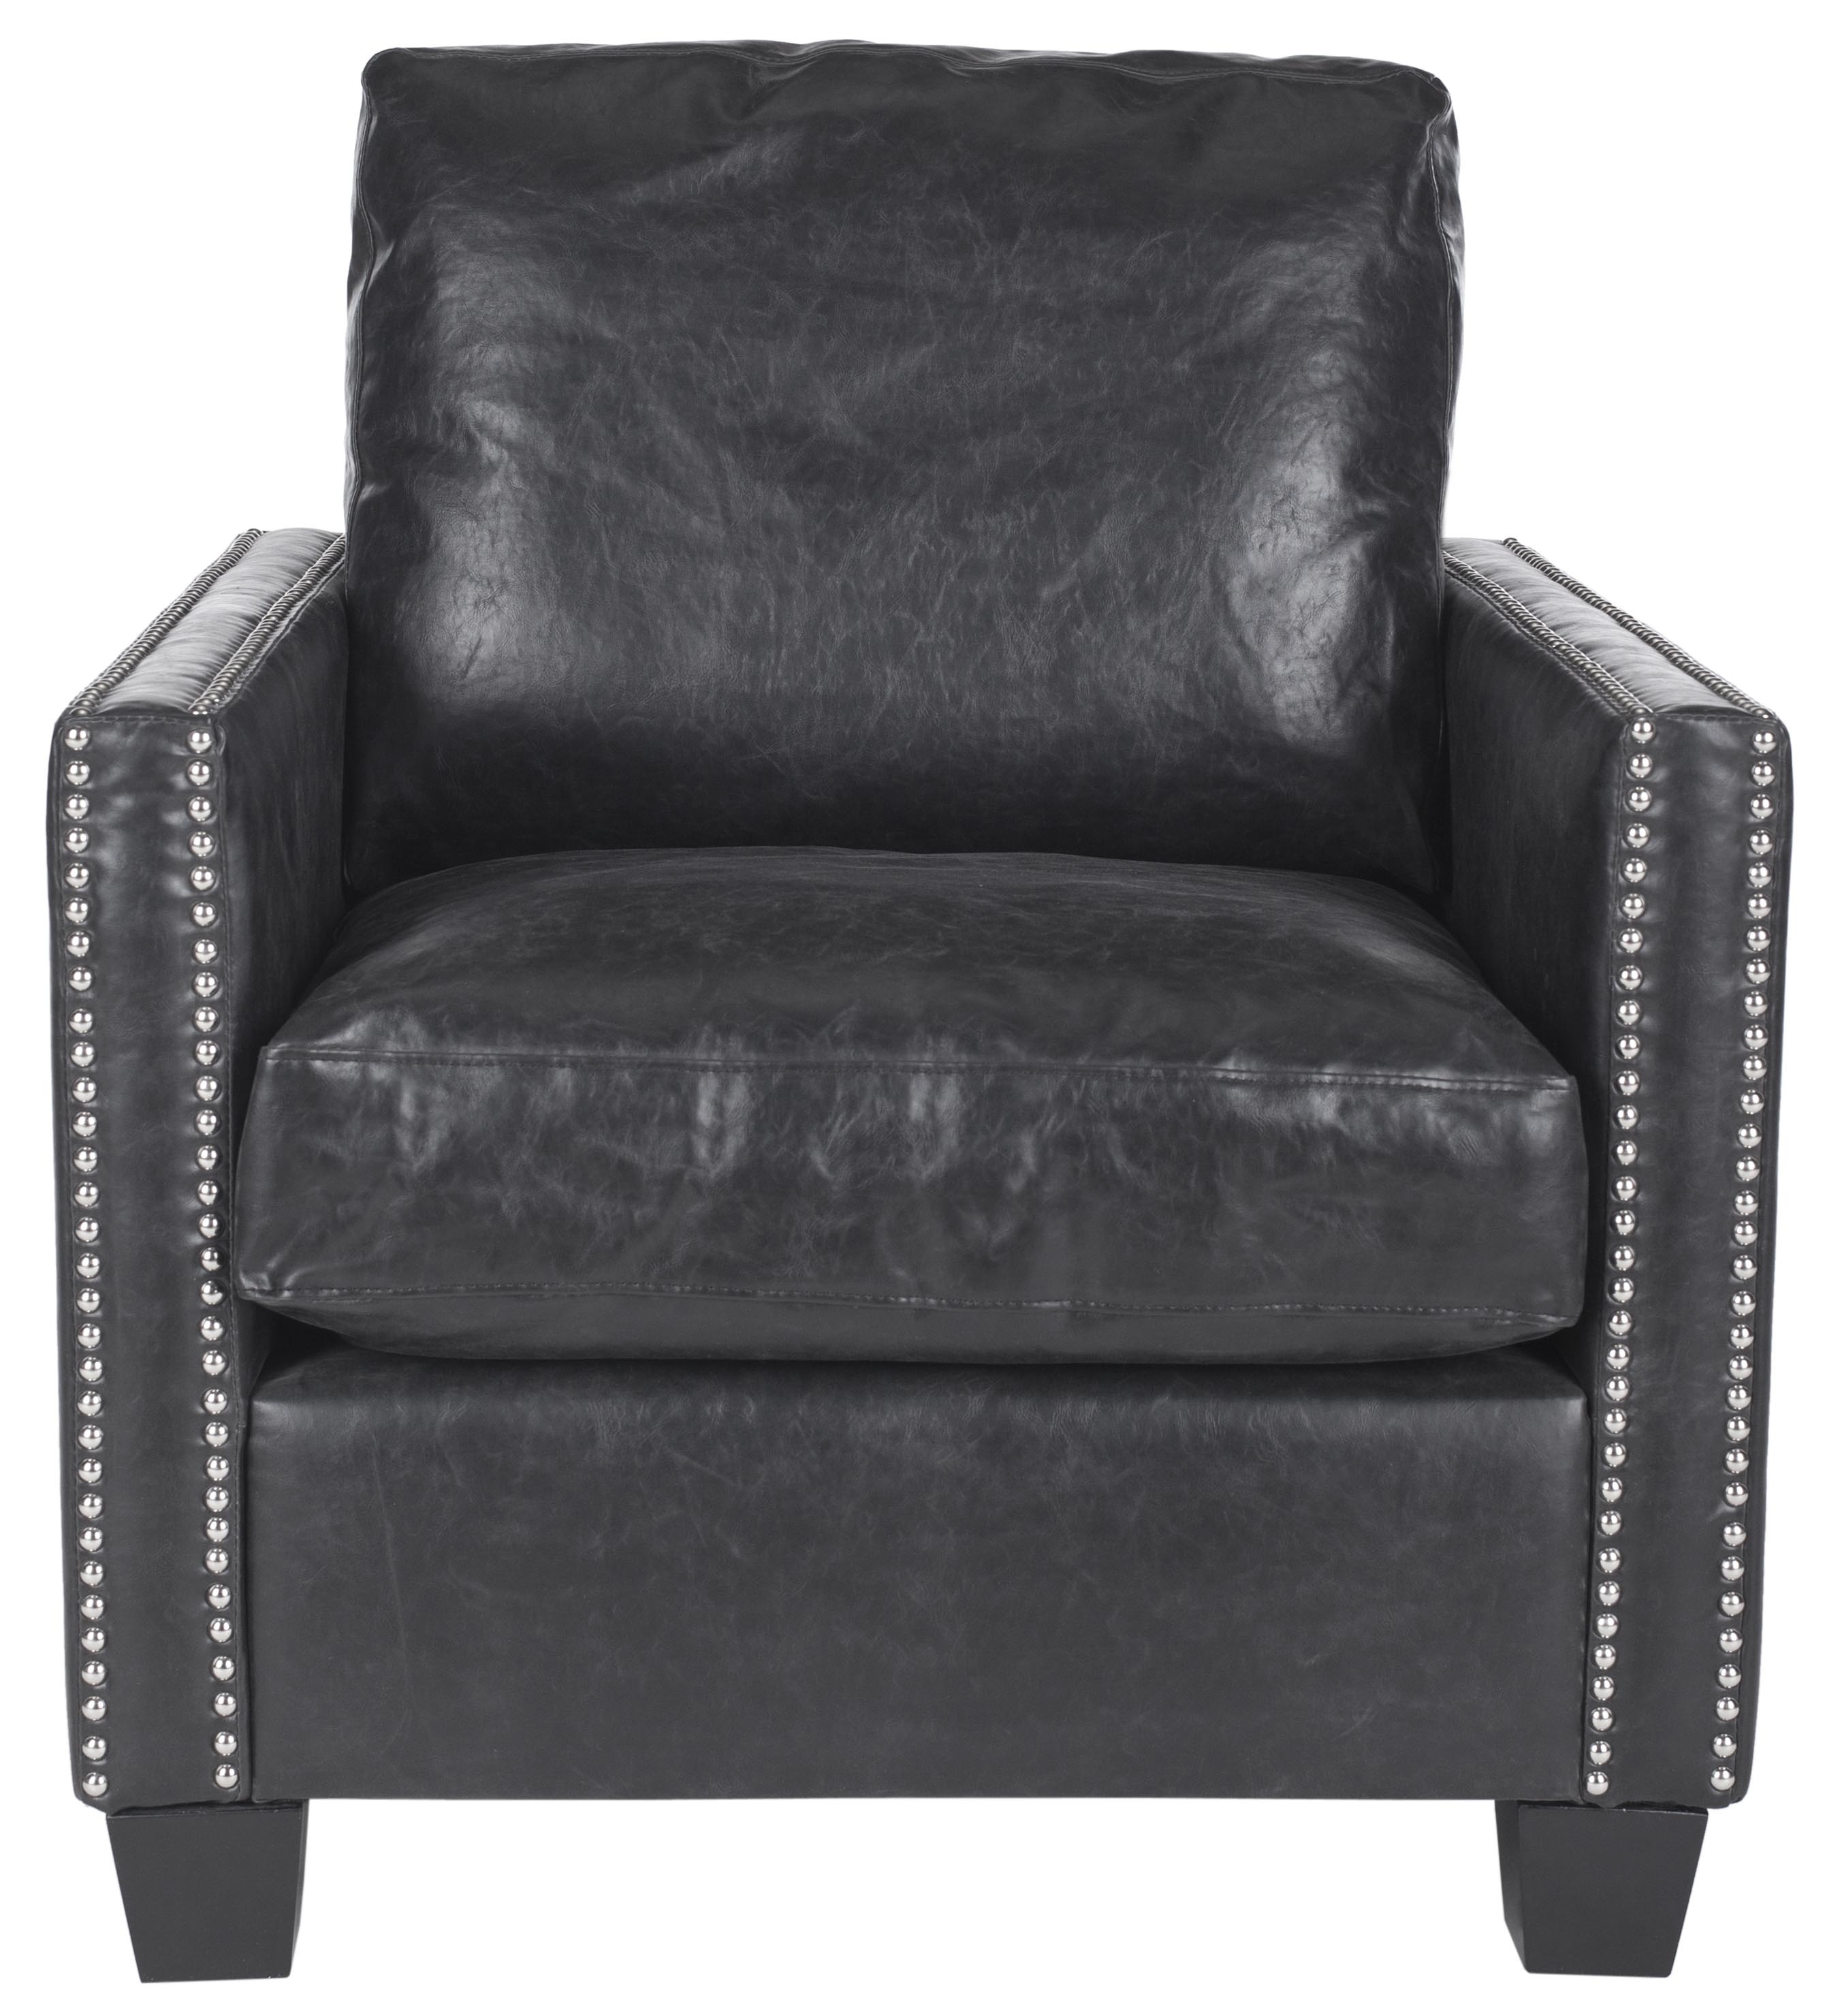 Horace Leather Club Chair - Silver Nail Heads - Antique Black/Black - Arlo Home - Image 0